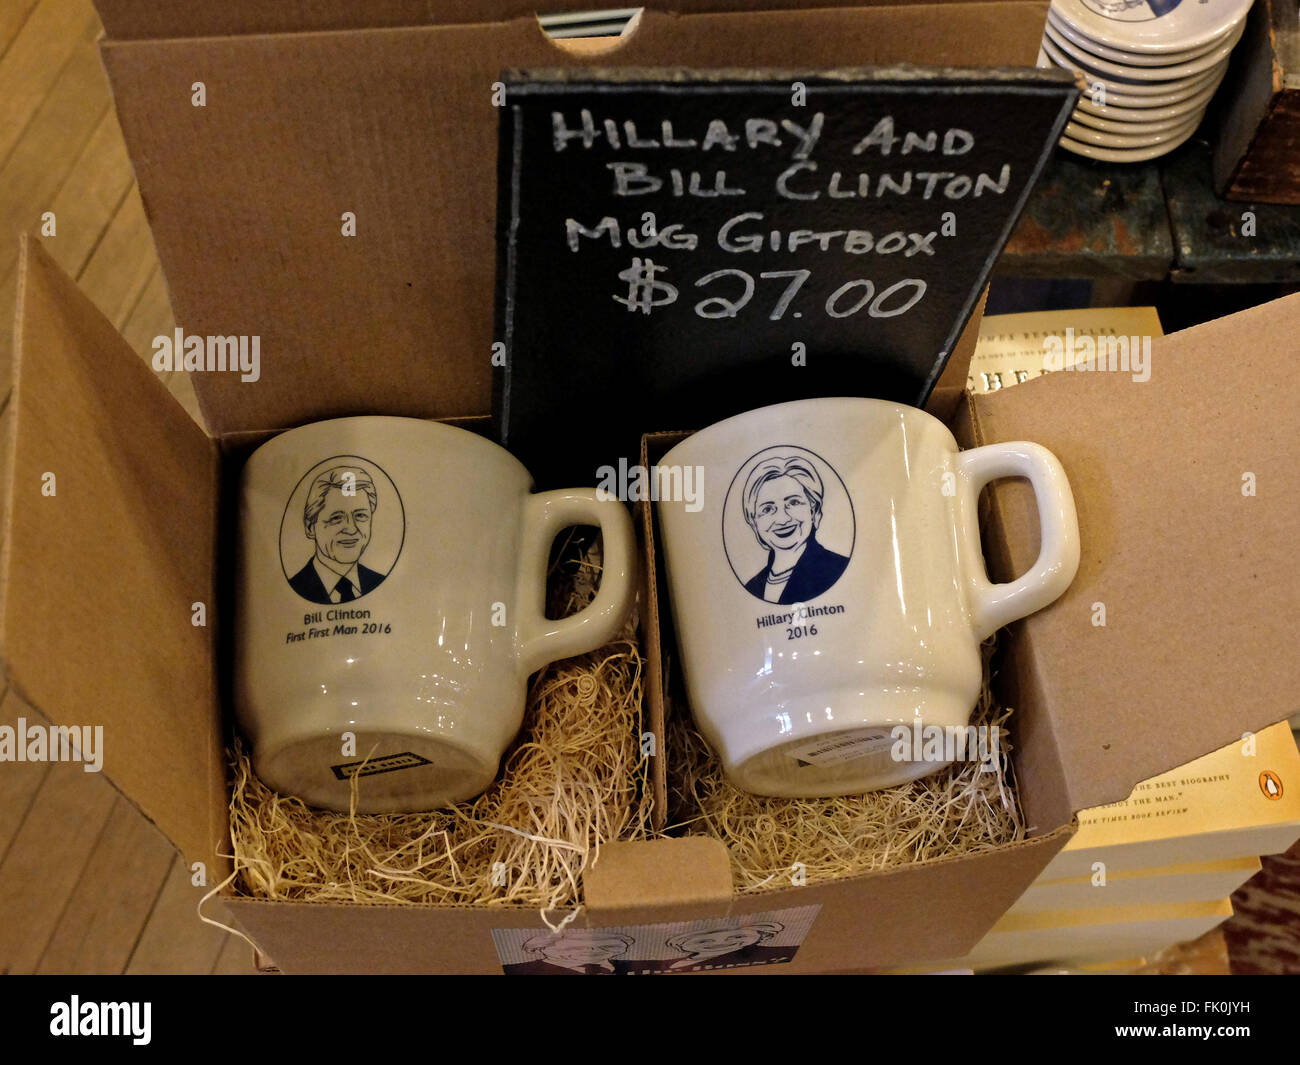 Bill & Hillary Clinton coffee mugs for sale at Fish's Eddy on Broadway in Lower Manhattan, New York City. Stock Photo